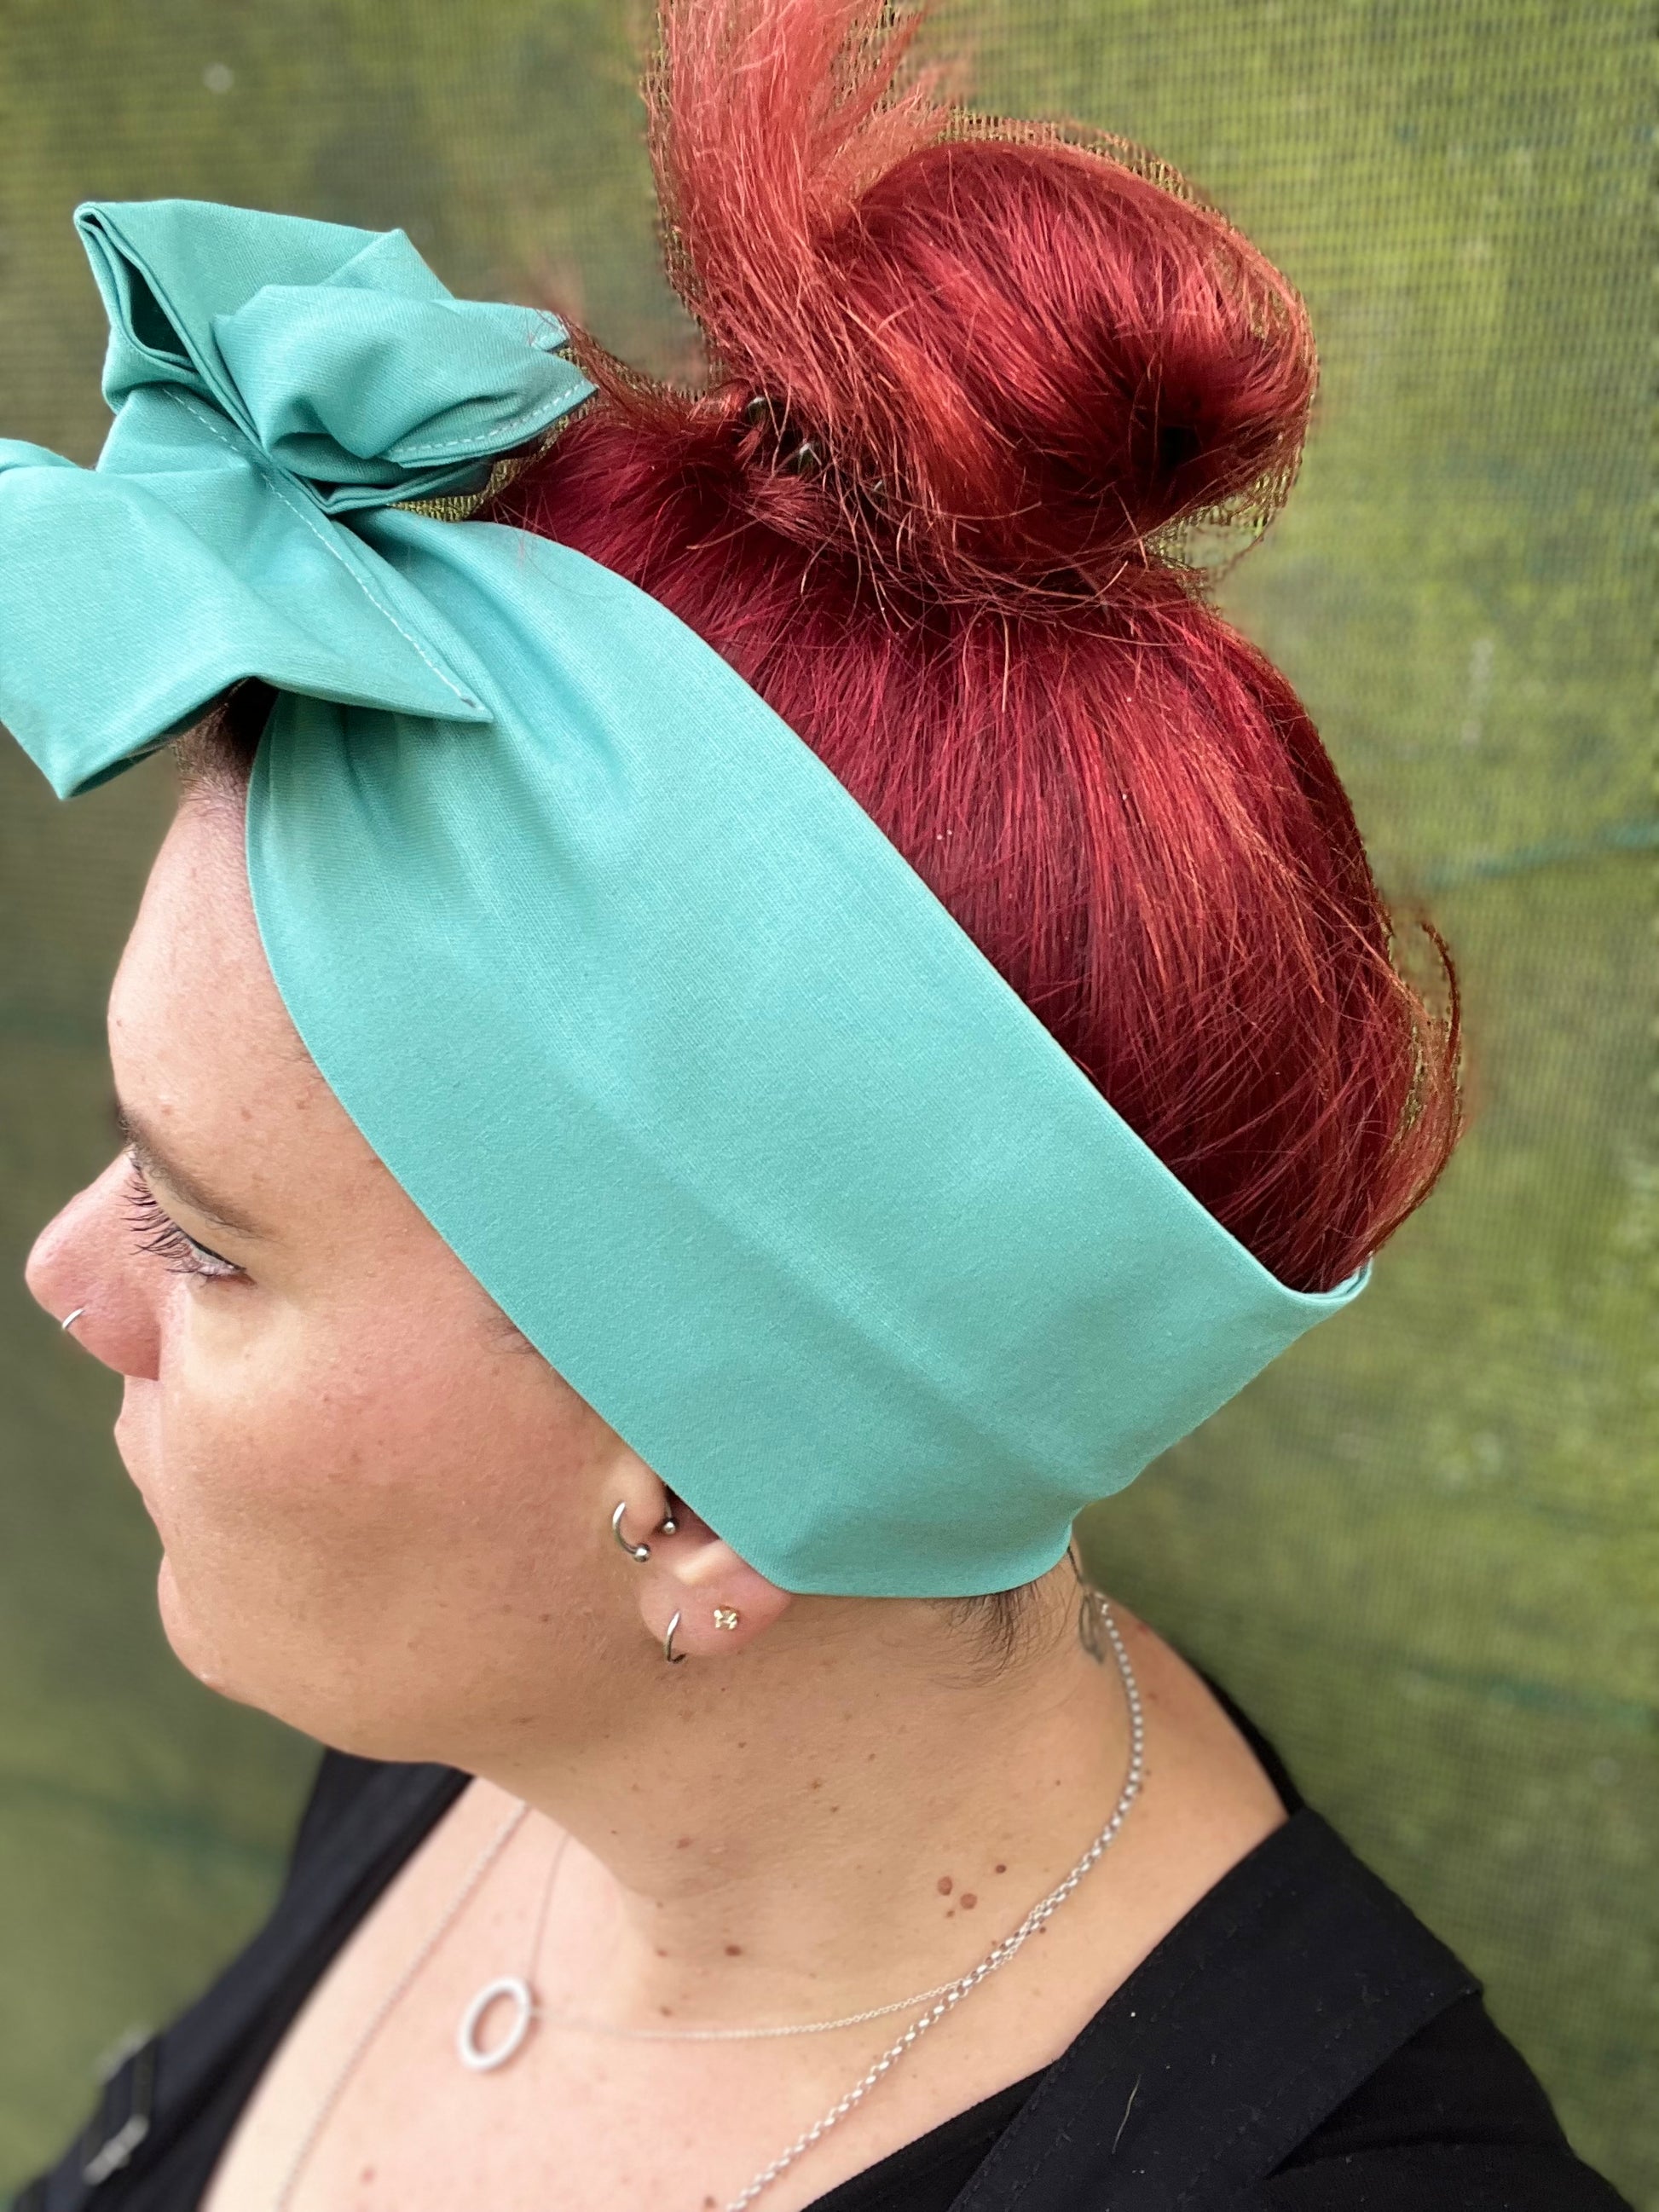 Cambridge Green Boho Wire Headband - Bae Bands Australia Twist Bow Wire Headband allows for your headband to stay in place all day with no headaches,